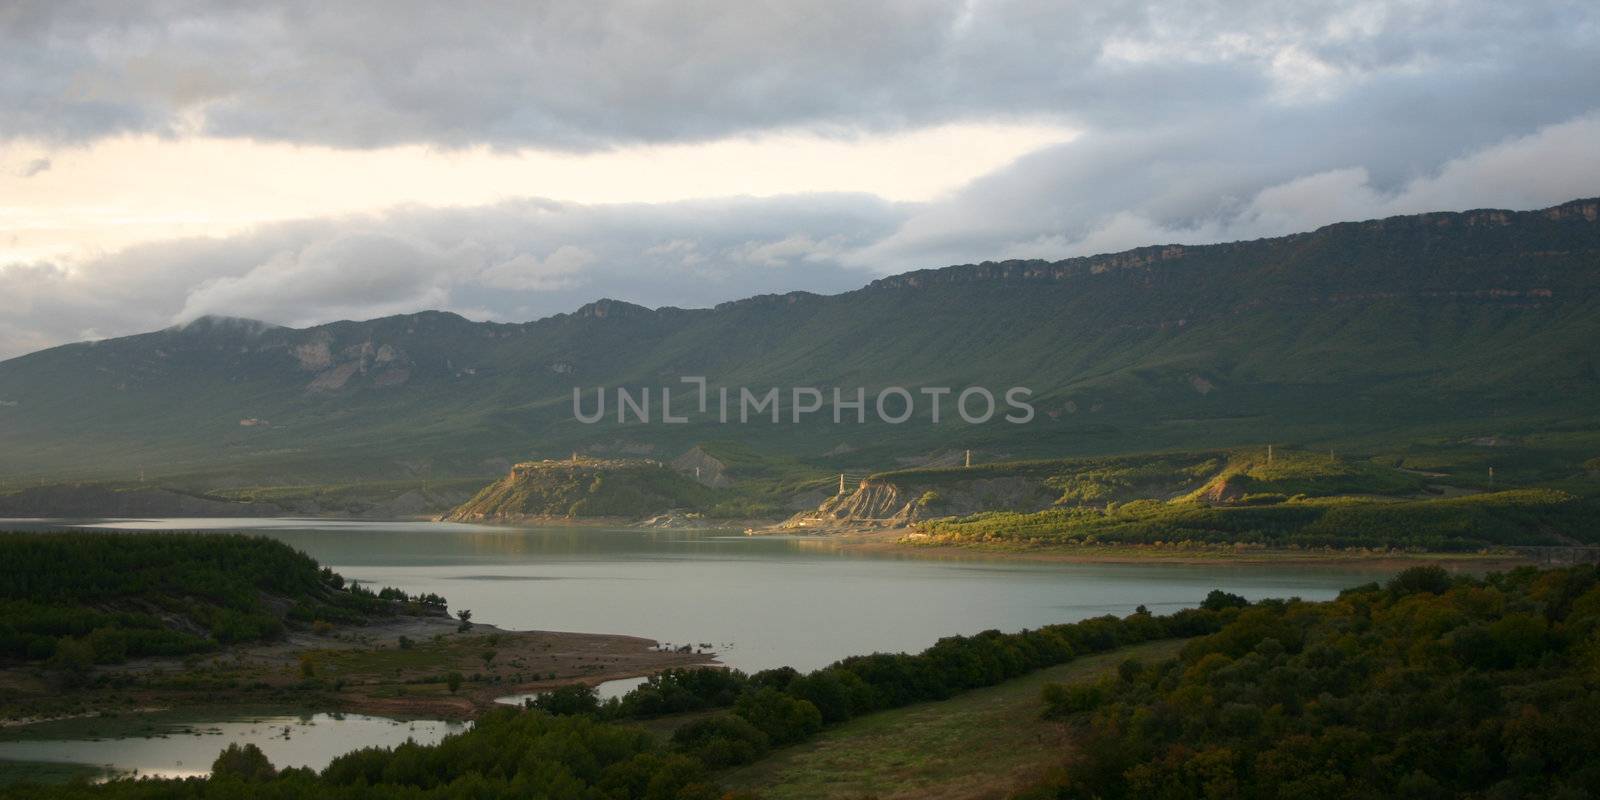 embalse de Yesa in Aragon, Spain, the planned enlargement of the reservoir is a big political and enviromental issue in the region